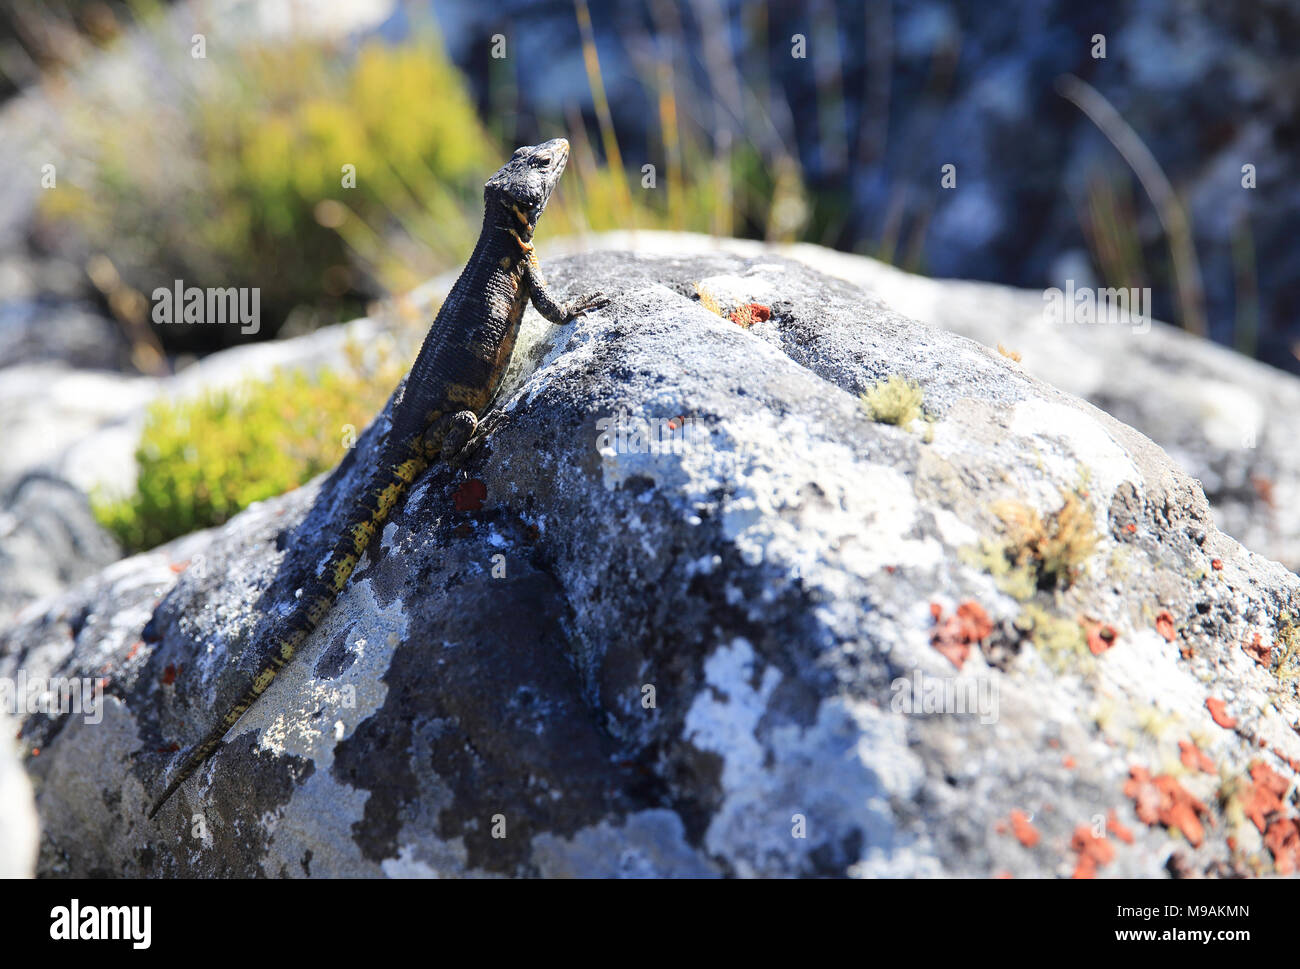 A black girdled lizard, on the top of Table Mountain, in Cape Town, South Africa Stock Photo